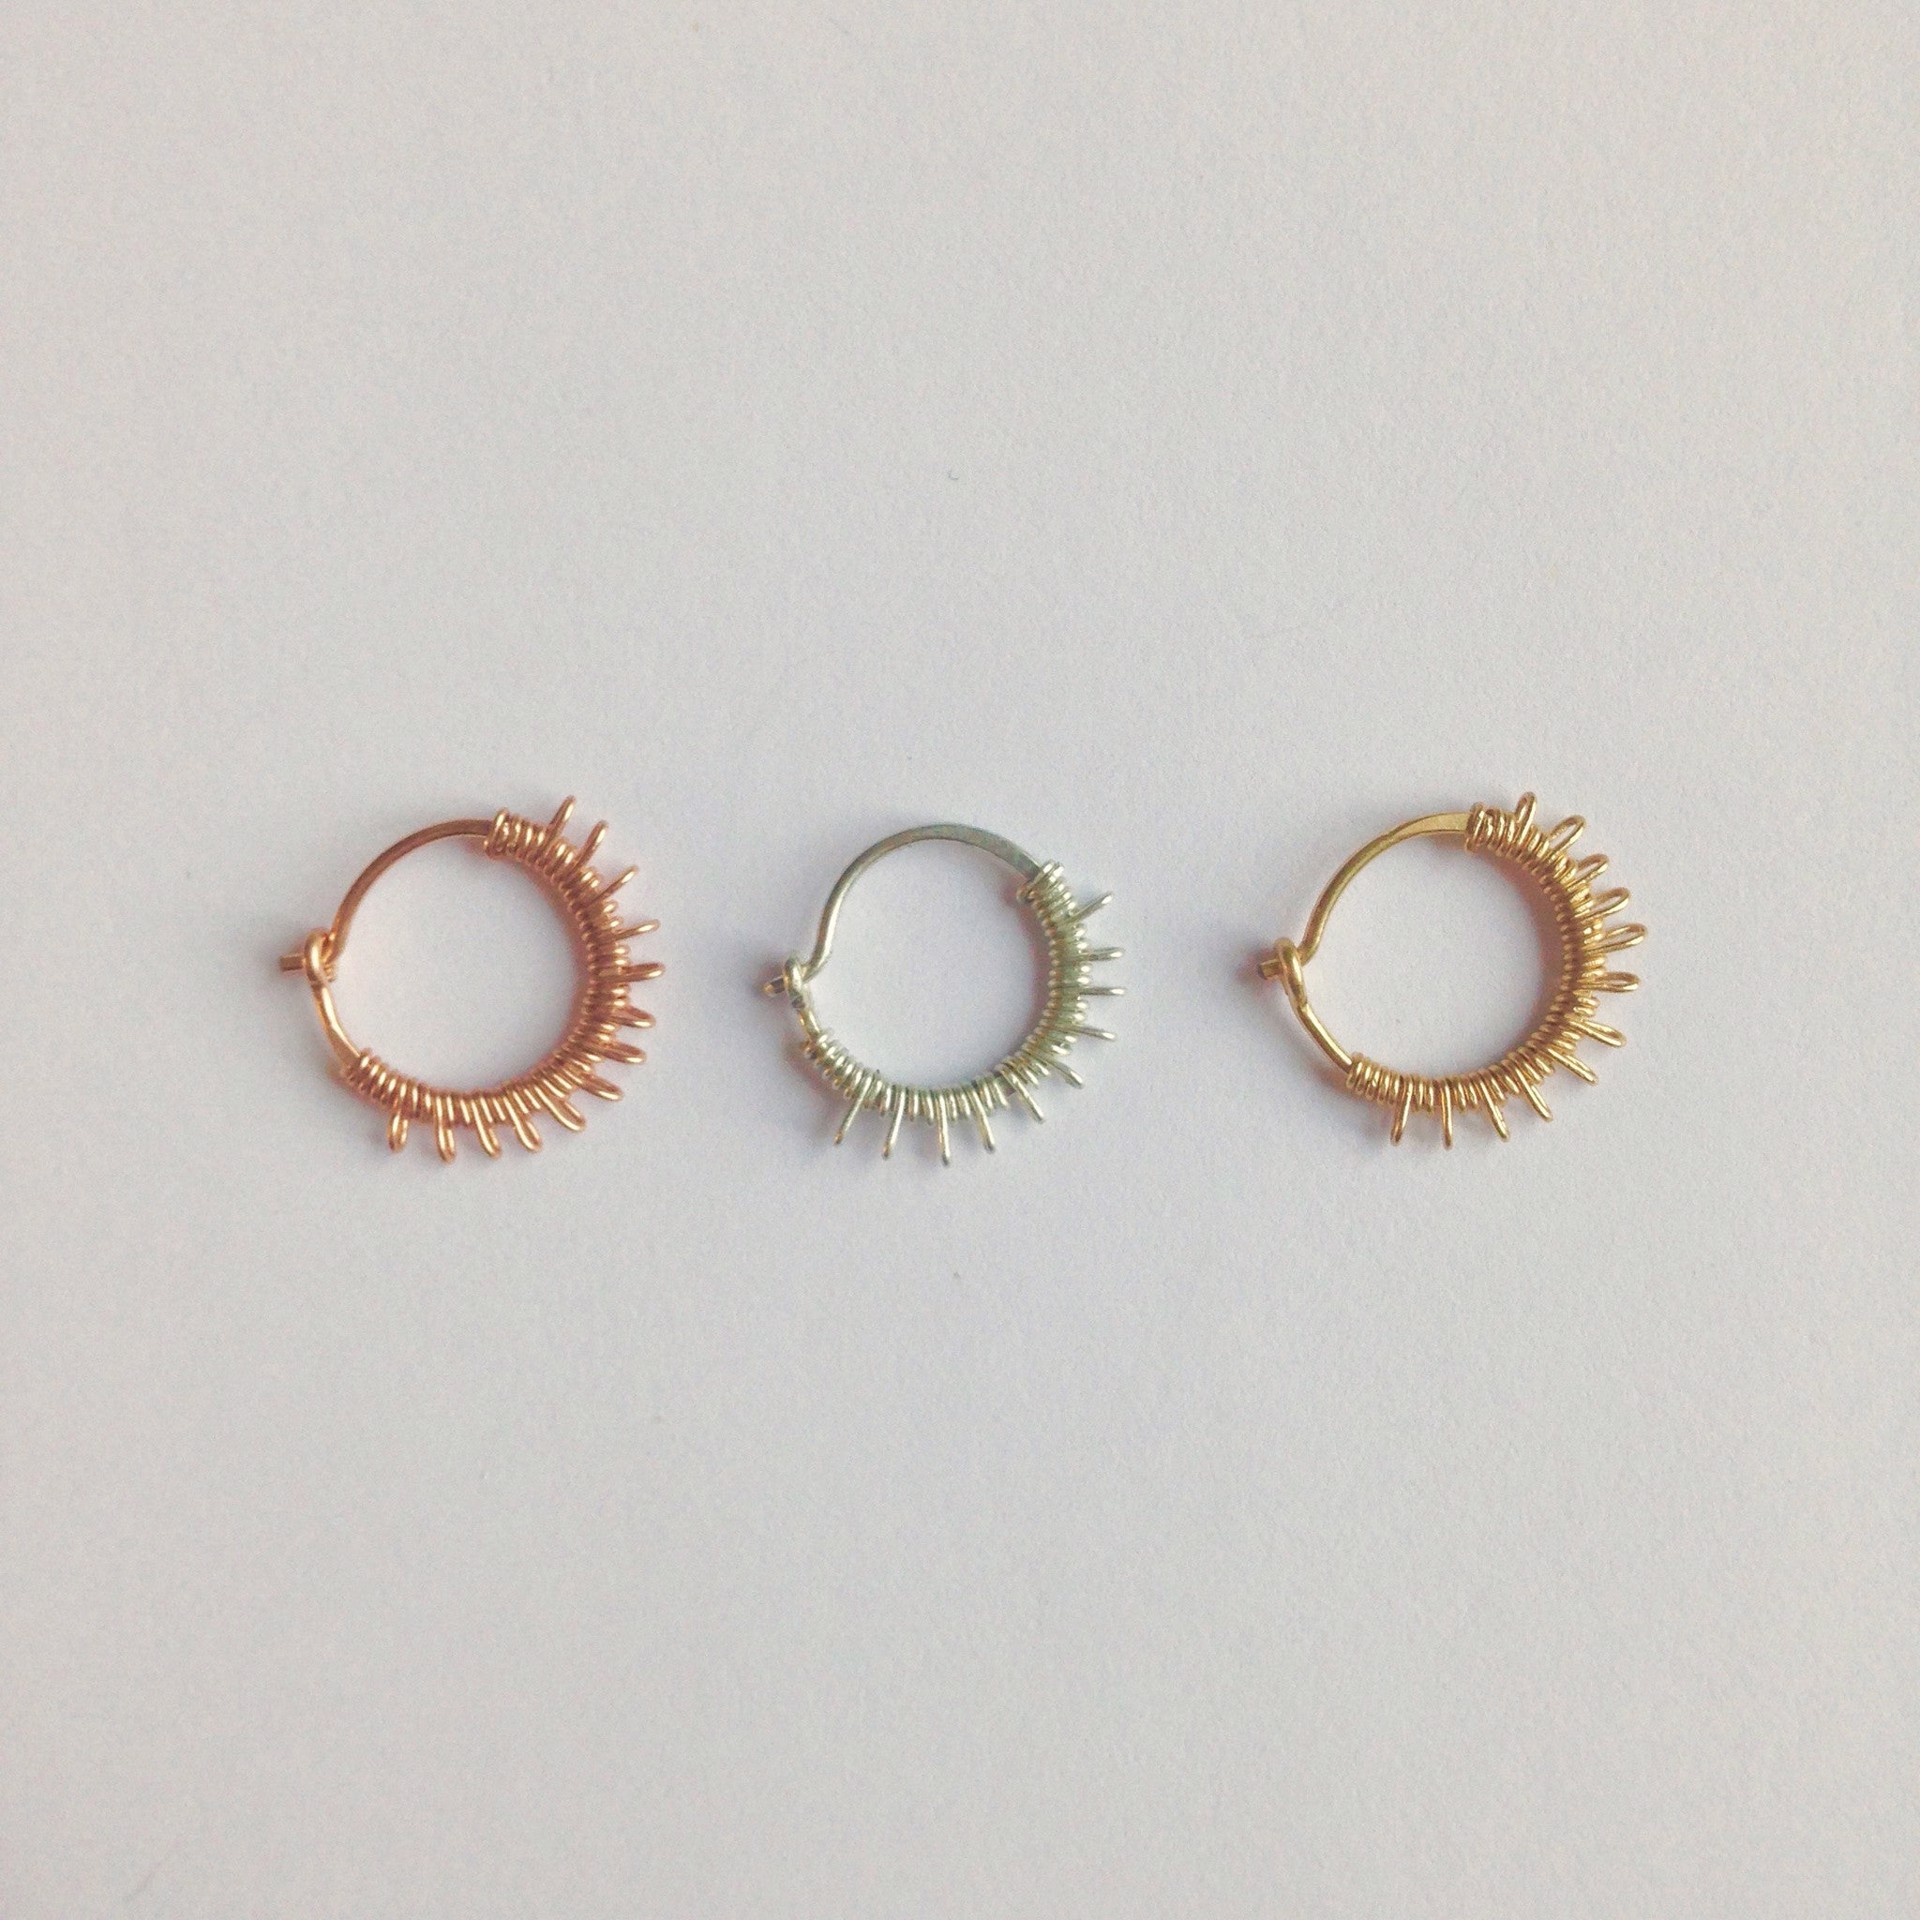 Lalita Nose Ring - Rose gold filled by Clementine & Co. Jewelry